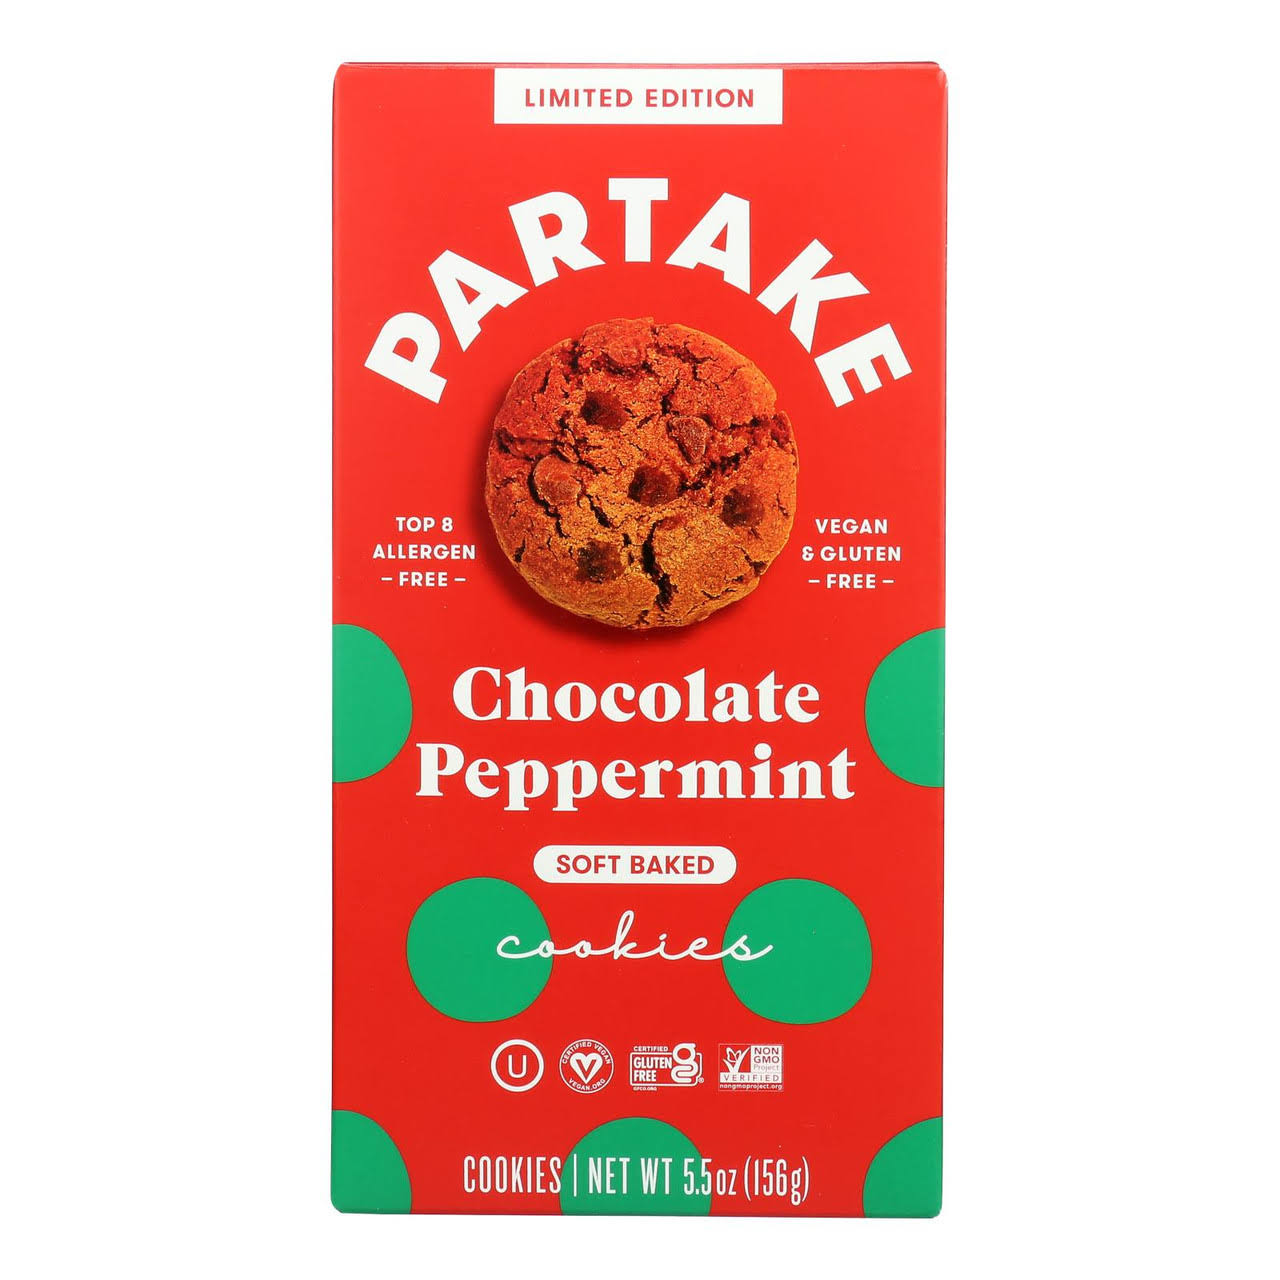 Partake Cookies, Chocolate Peppermint, Soft Baked, - 5.5 oz